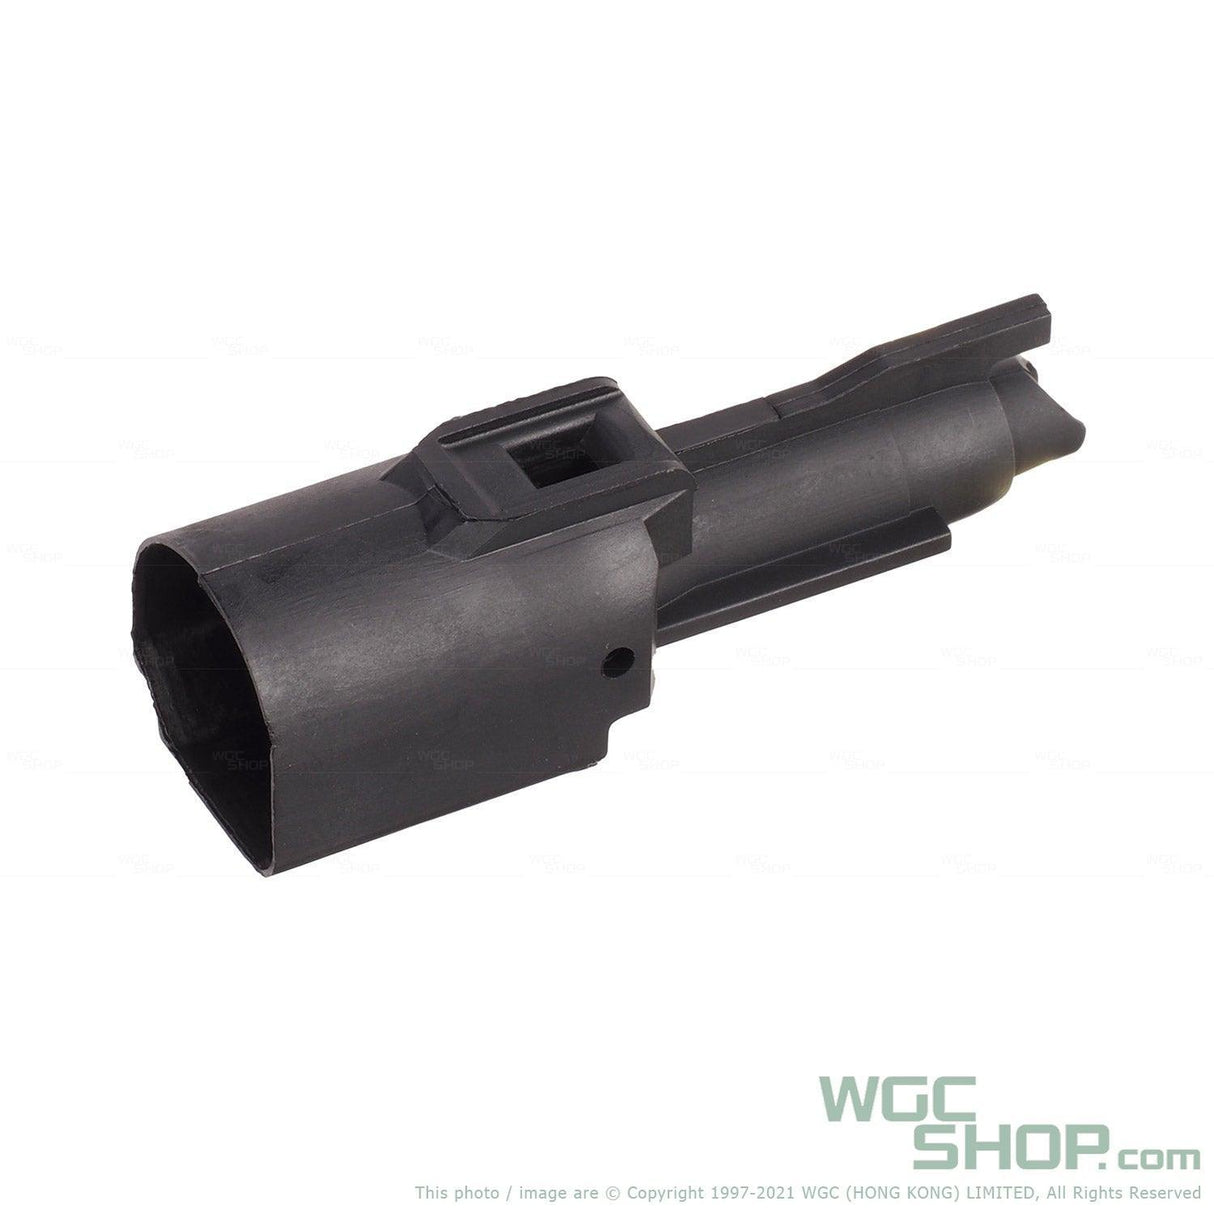 CRUSADER Reinforced Nozzle Set for VFC Glock GBB Airsoft Series - WGC Shop